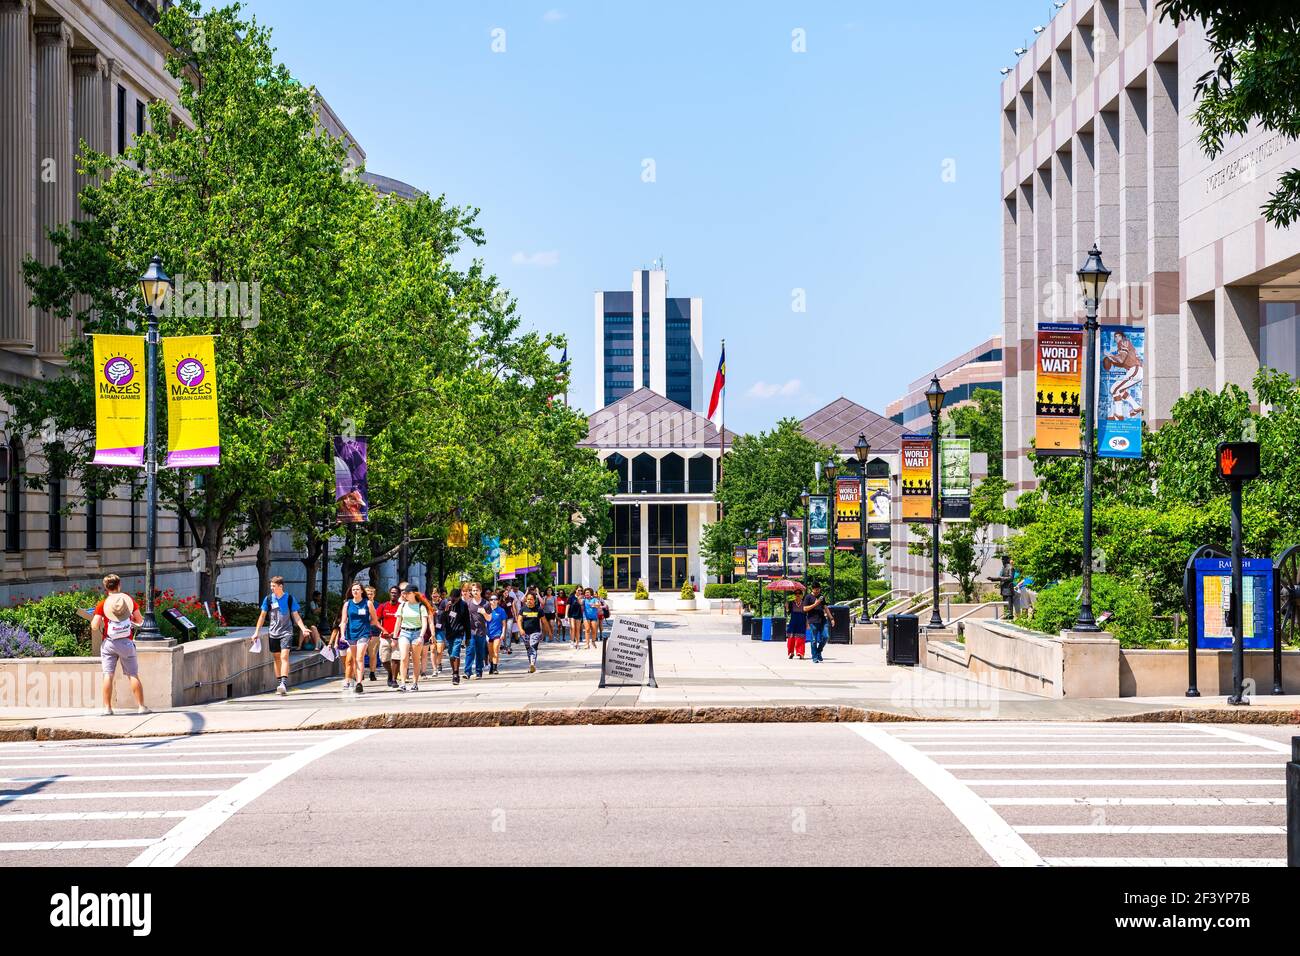 Raleigh, USA - May 12, 2018: North Carolina Museum of natural sciences and history in downtown with school trip people by state legislative legislatur Stock Photo